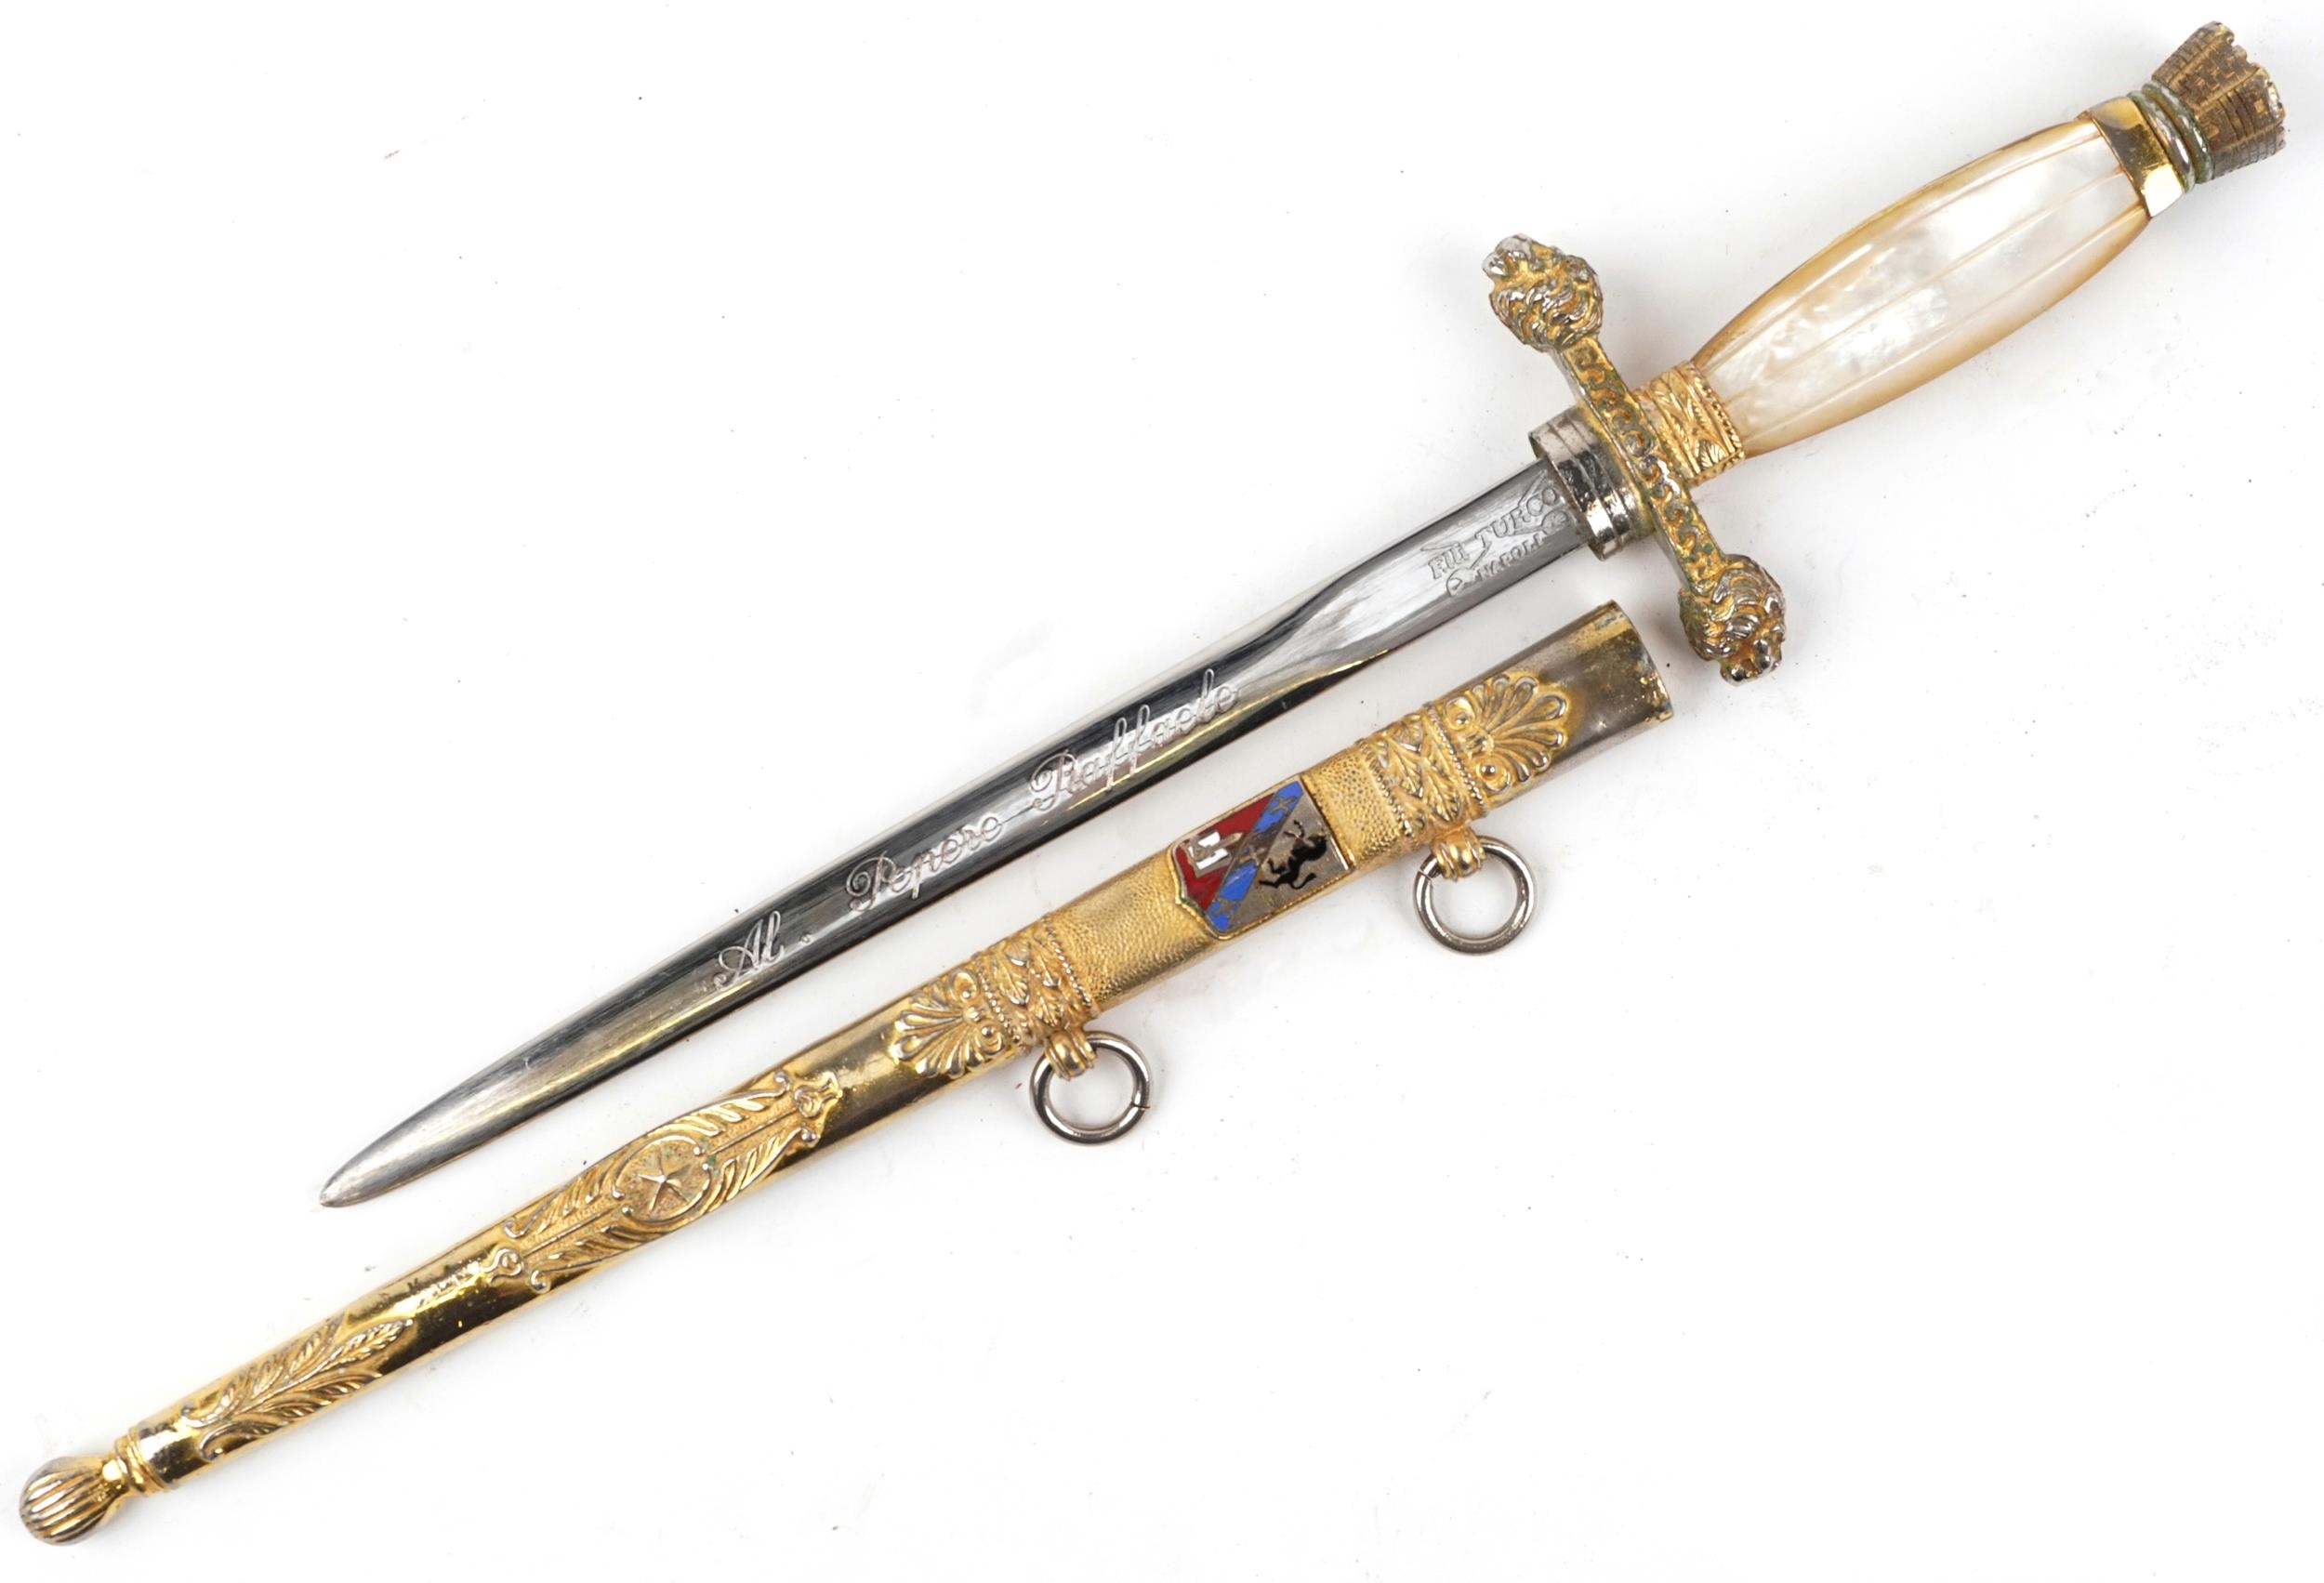 Italian military interest cadet's short sword with scabbard, mother of pearl grip and steel blade